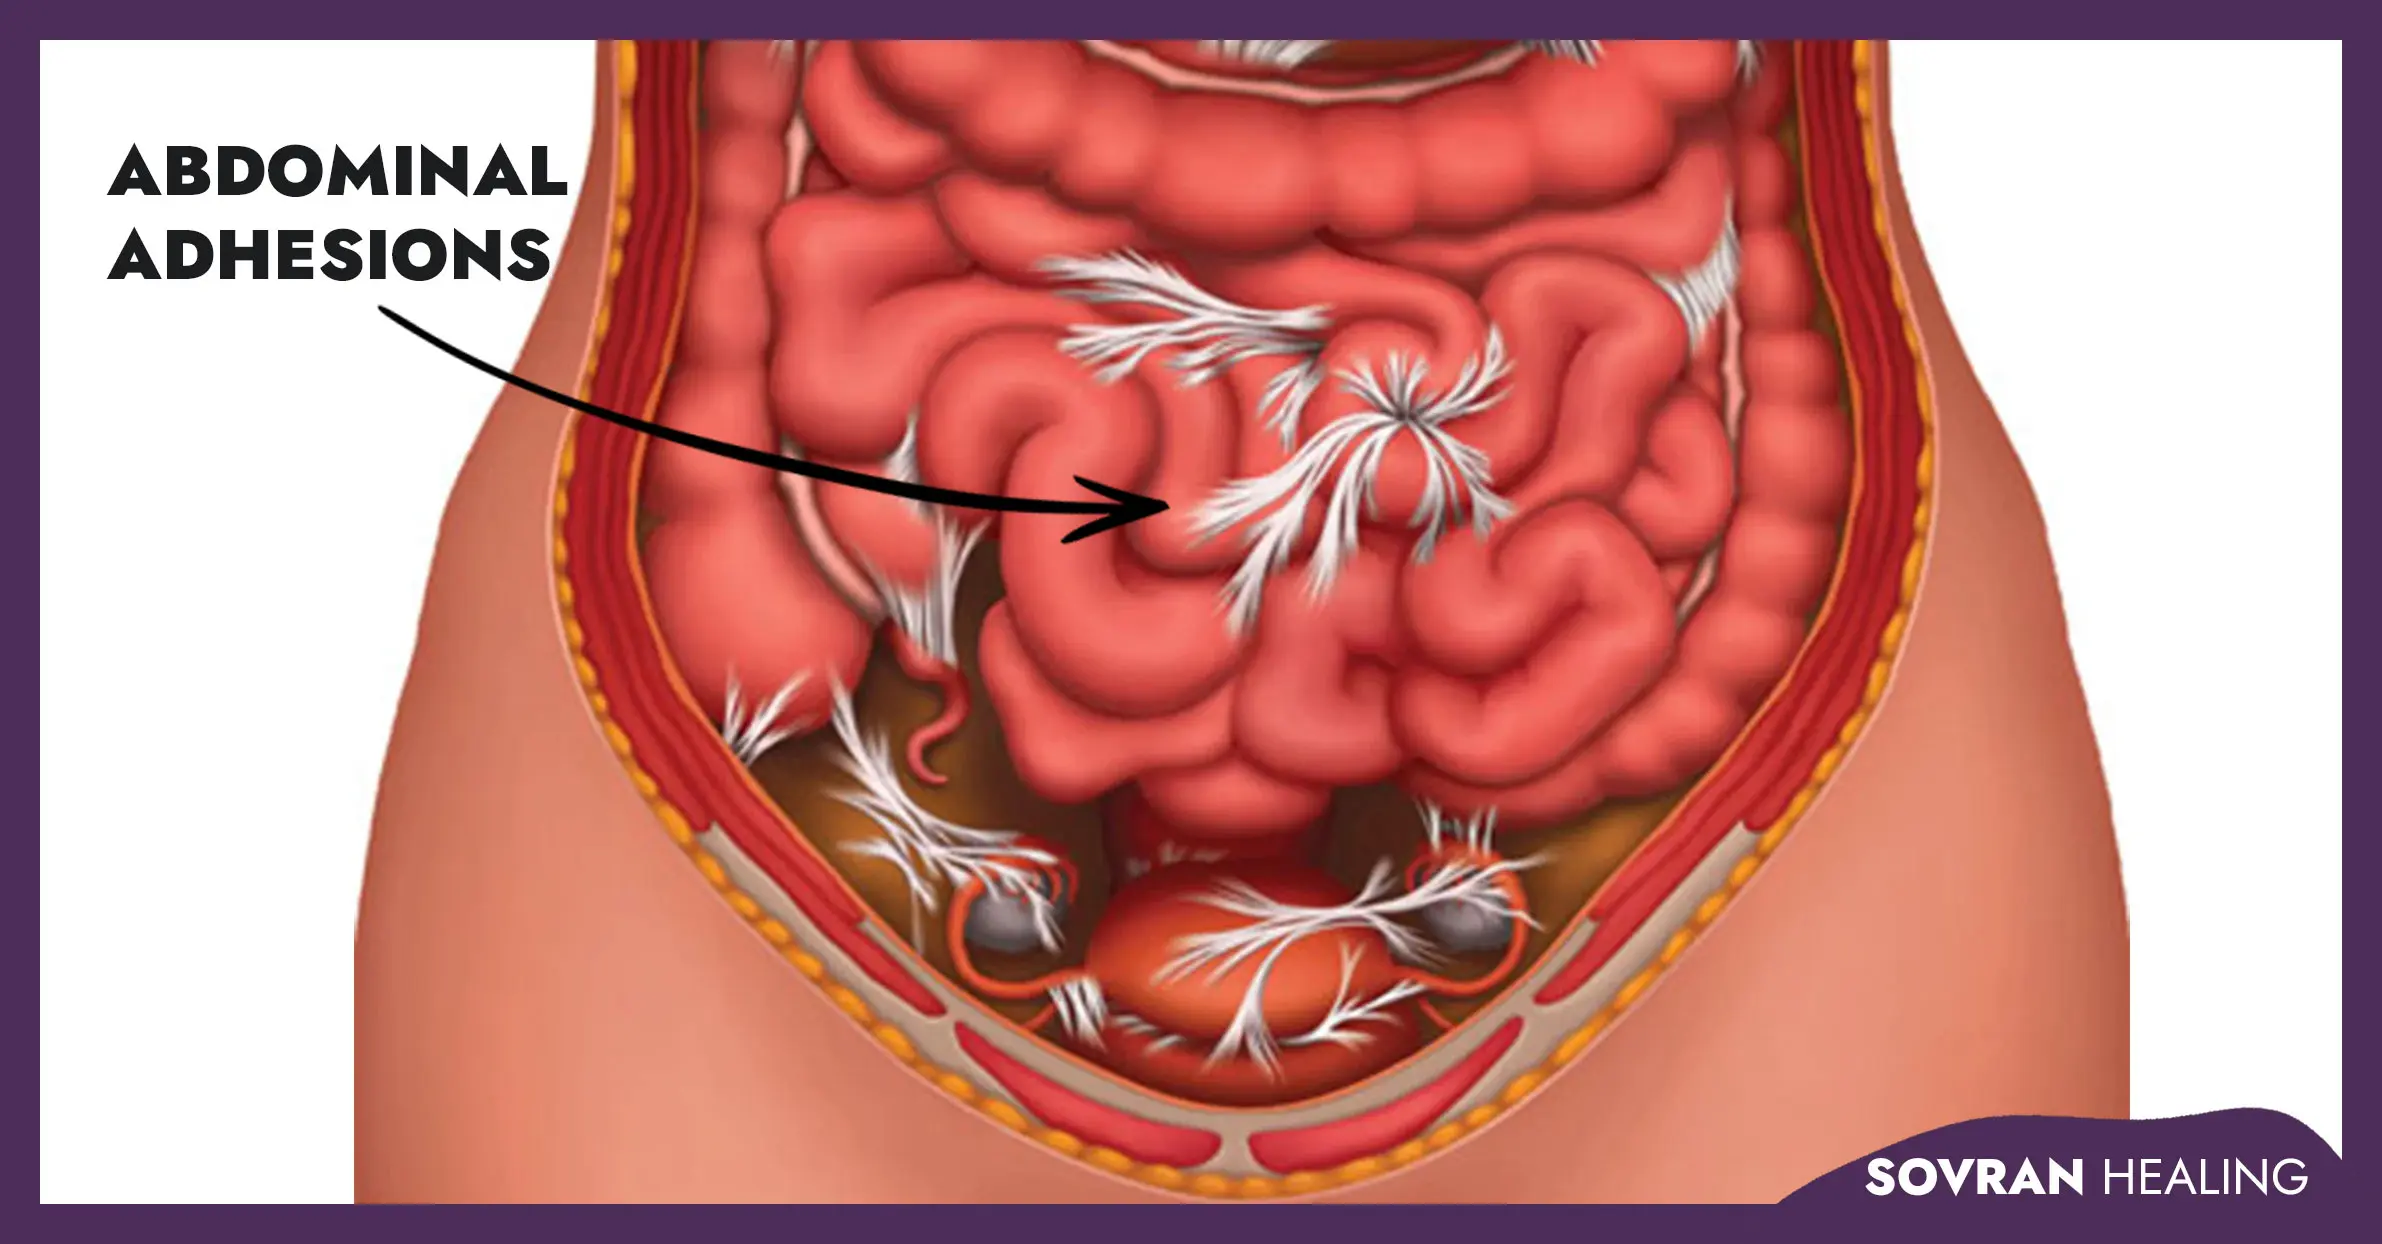 Illustration showing abdominal adhesions post Cesarean section Complications that can occur years later